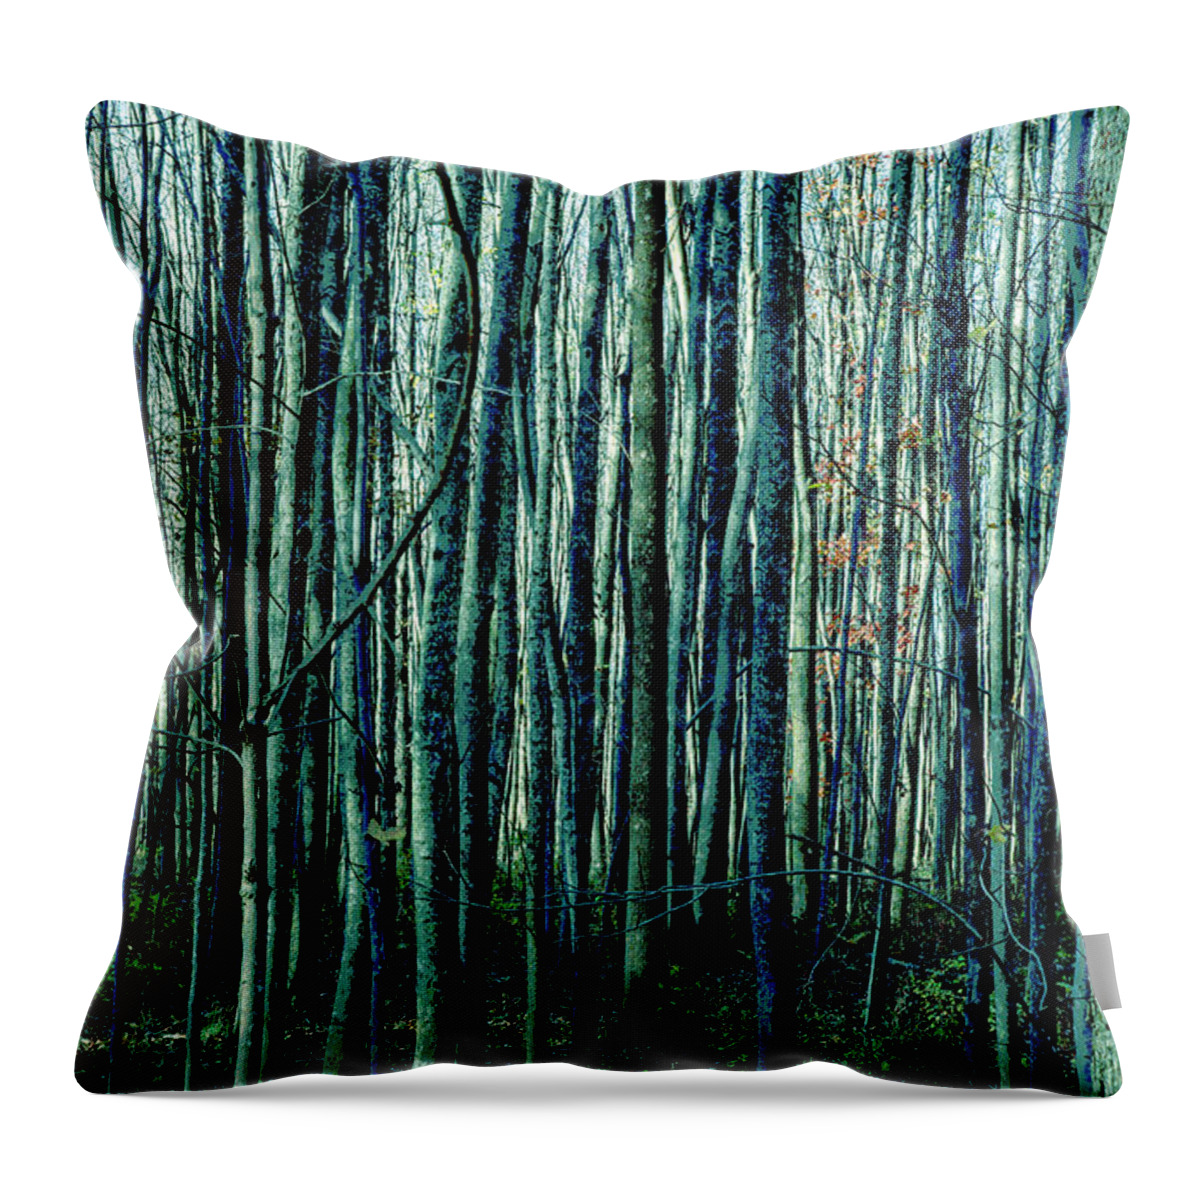 Treez Throw Pillow featuring the photograph Treez Cyan by Lon Dittrick